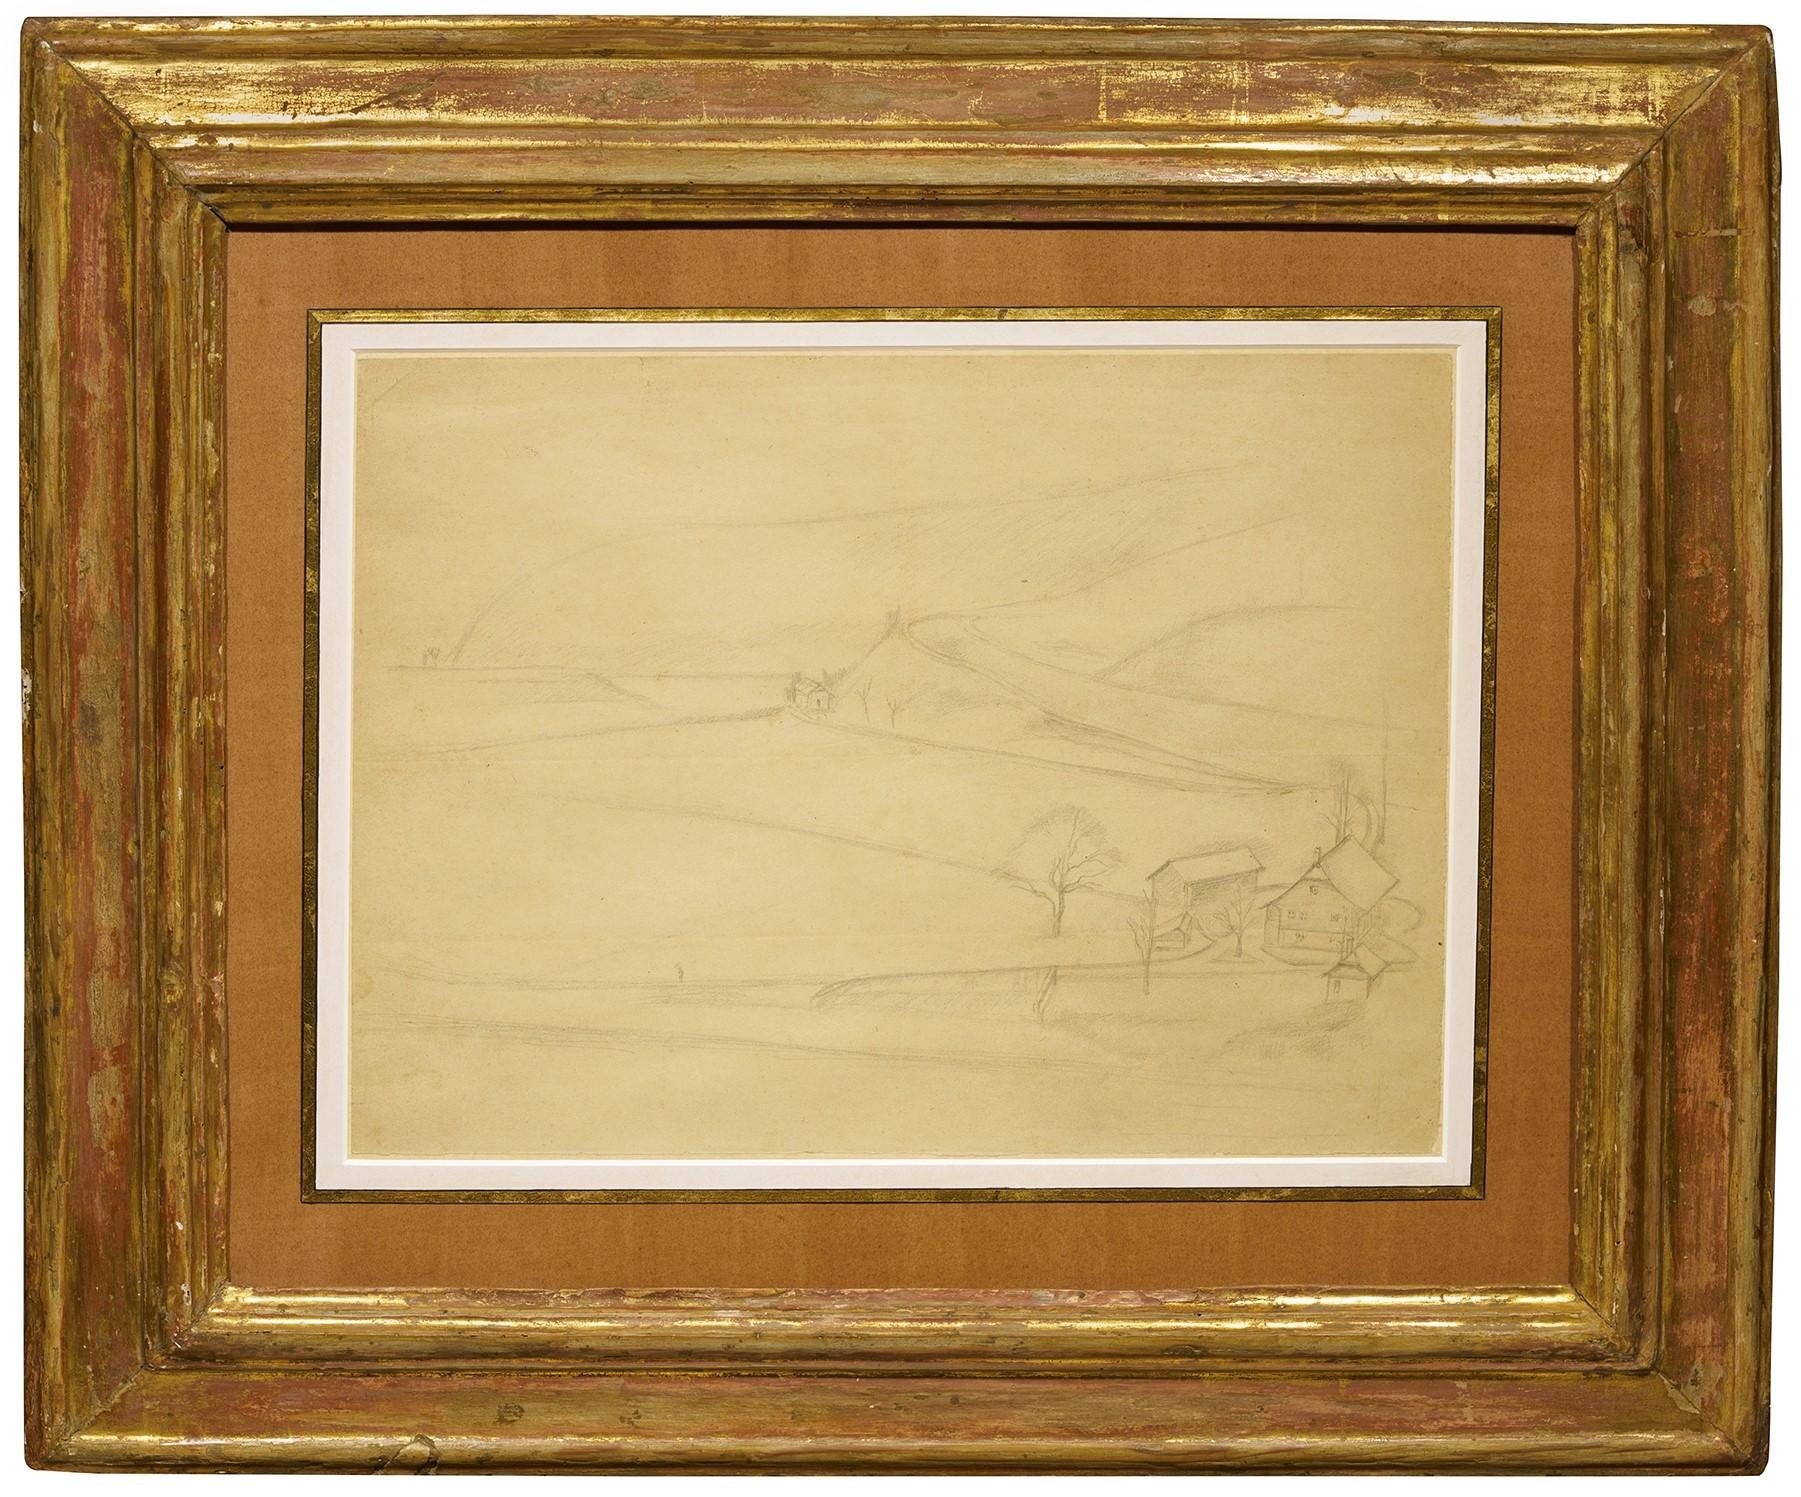 Study for « Paysage de Fribourg » - 1943 a drawing by Balthus (1908 - 2001) - Painting by Balthus (Balthasar Klossowski de Rola) 